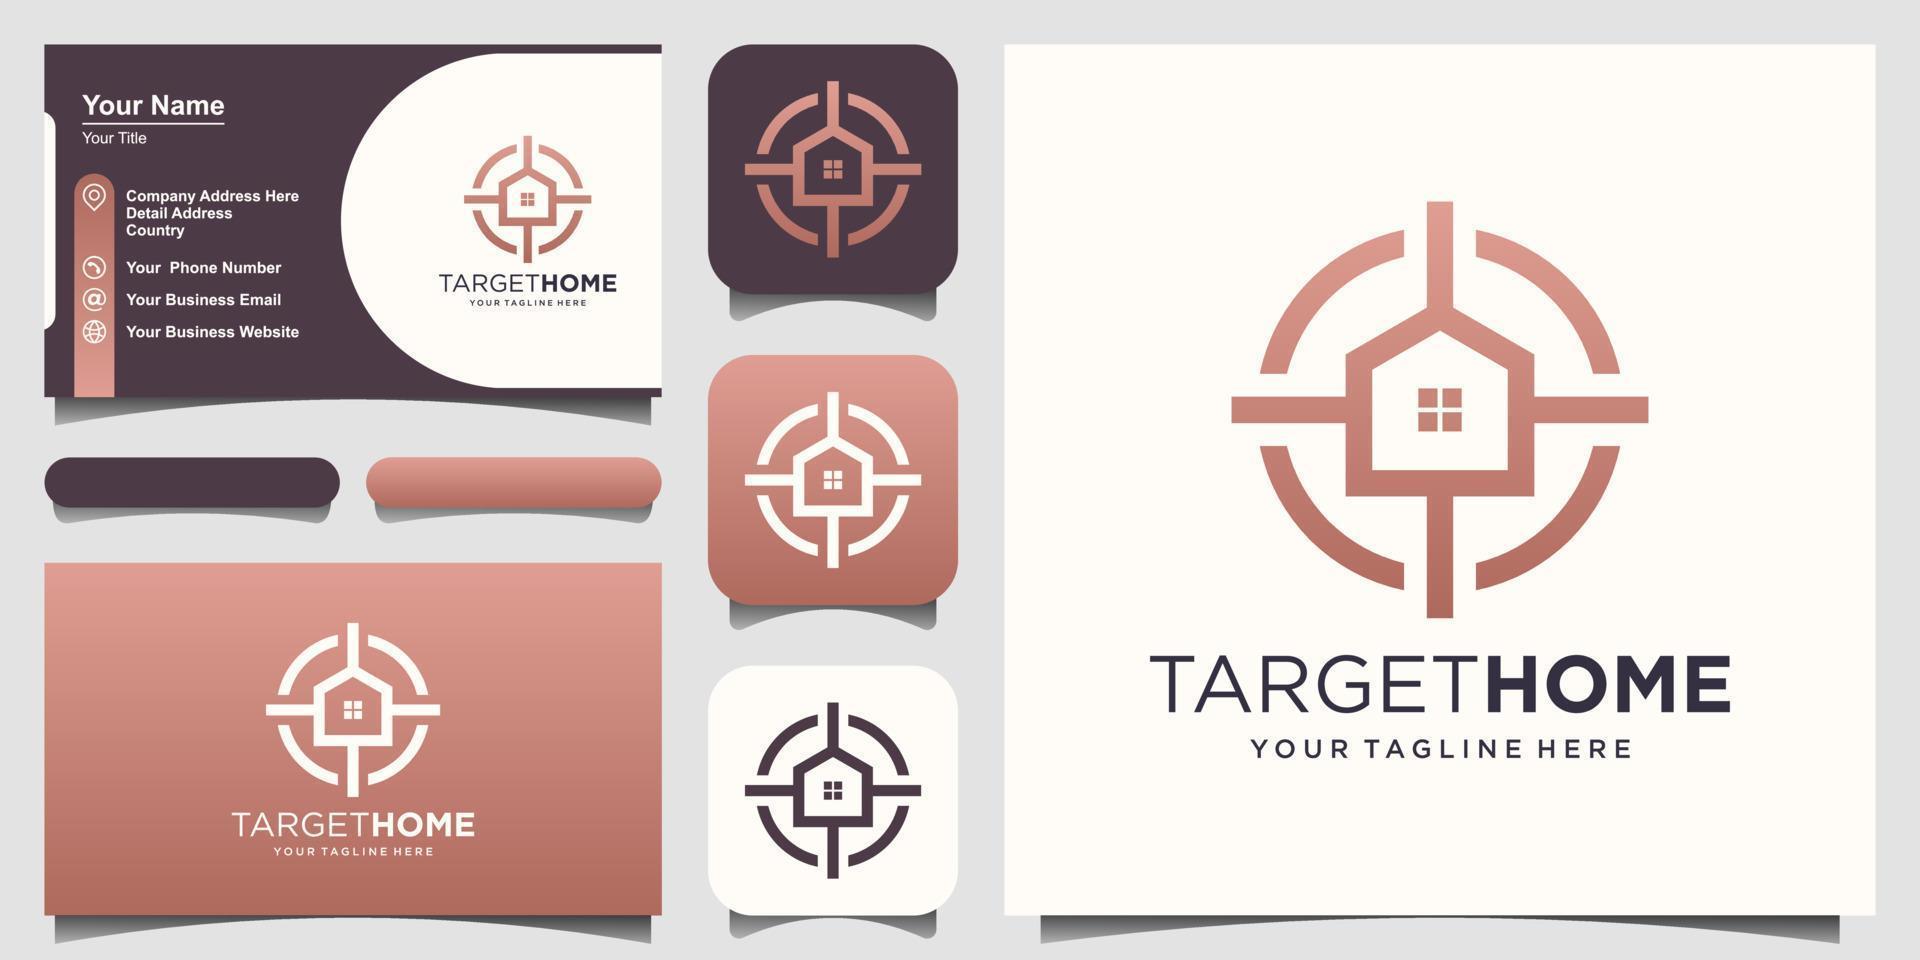 target home Logo designs Template. house combined with target sign. vector